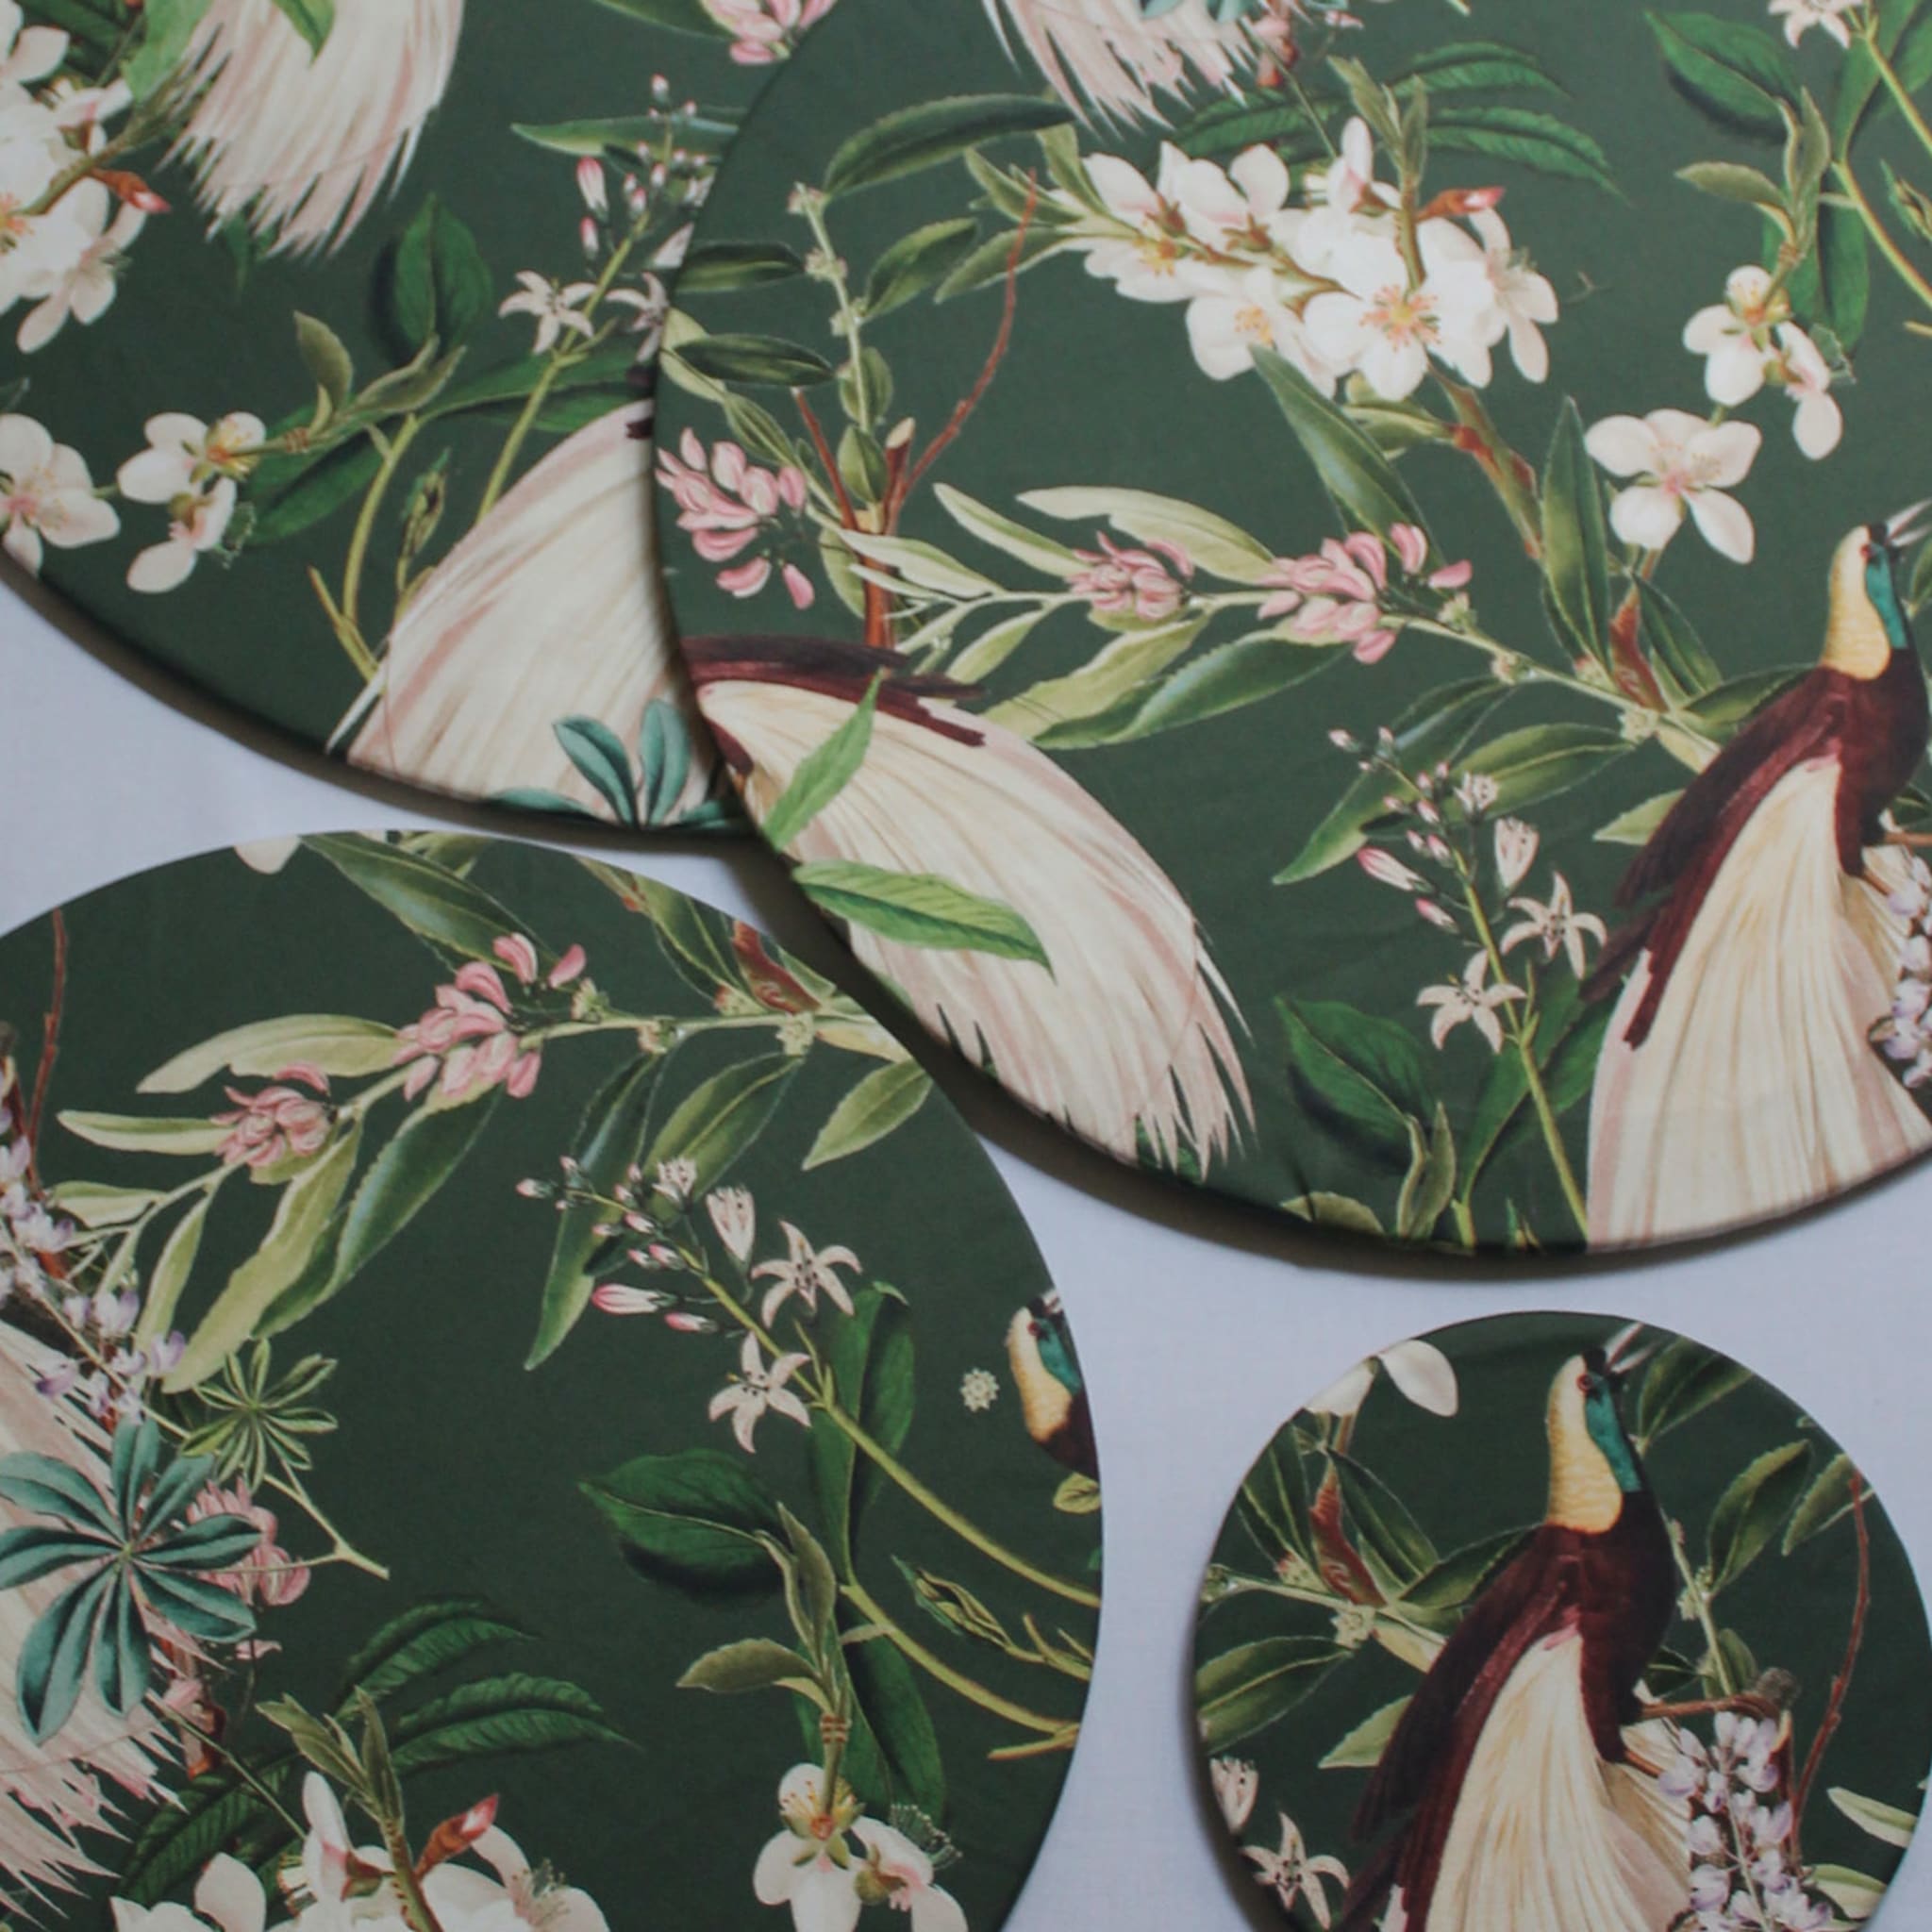 Set of 2 Cuffiette Extra-Small Round Tropical Placemats - Alternative view 2